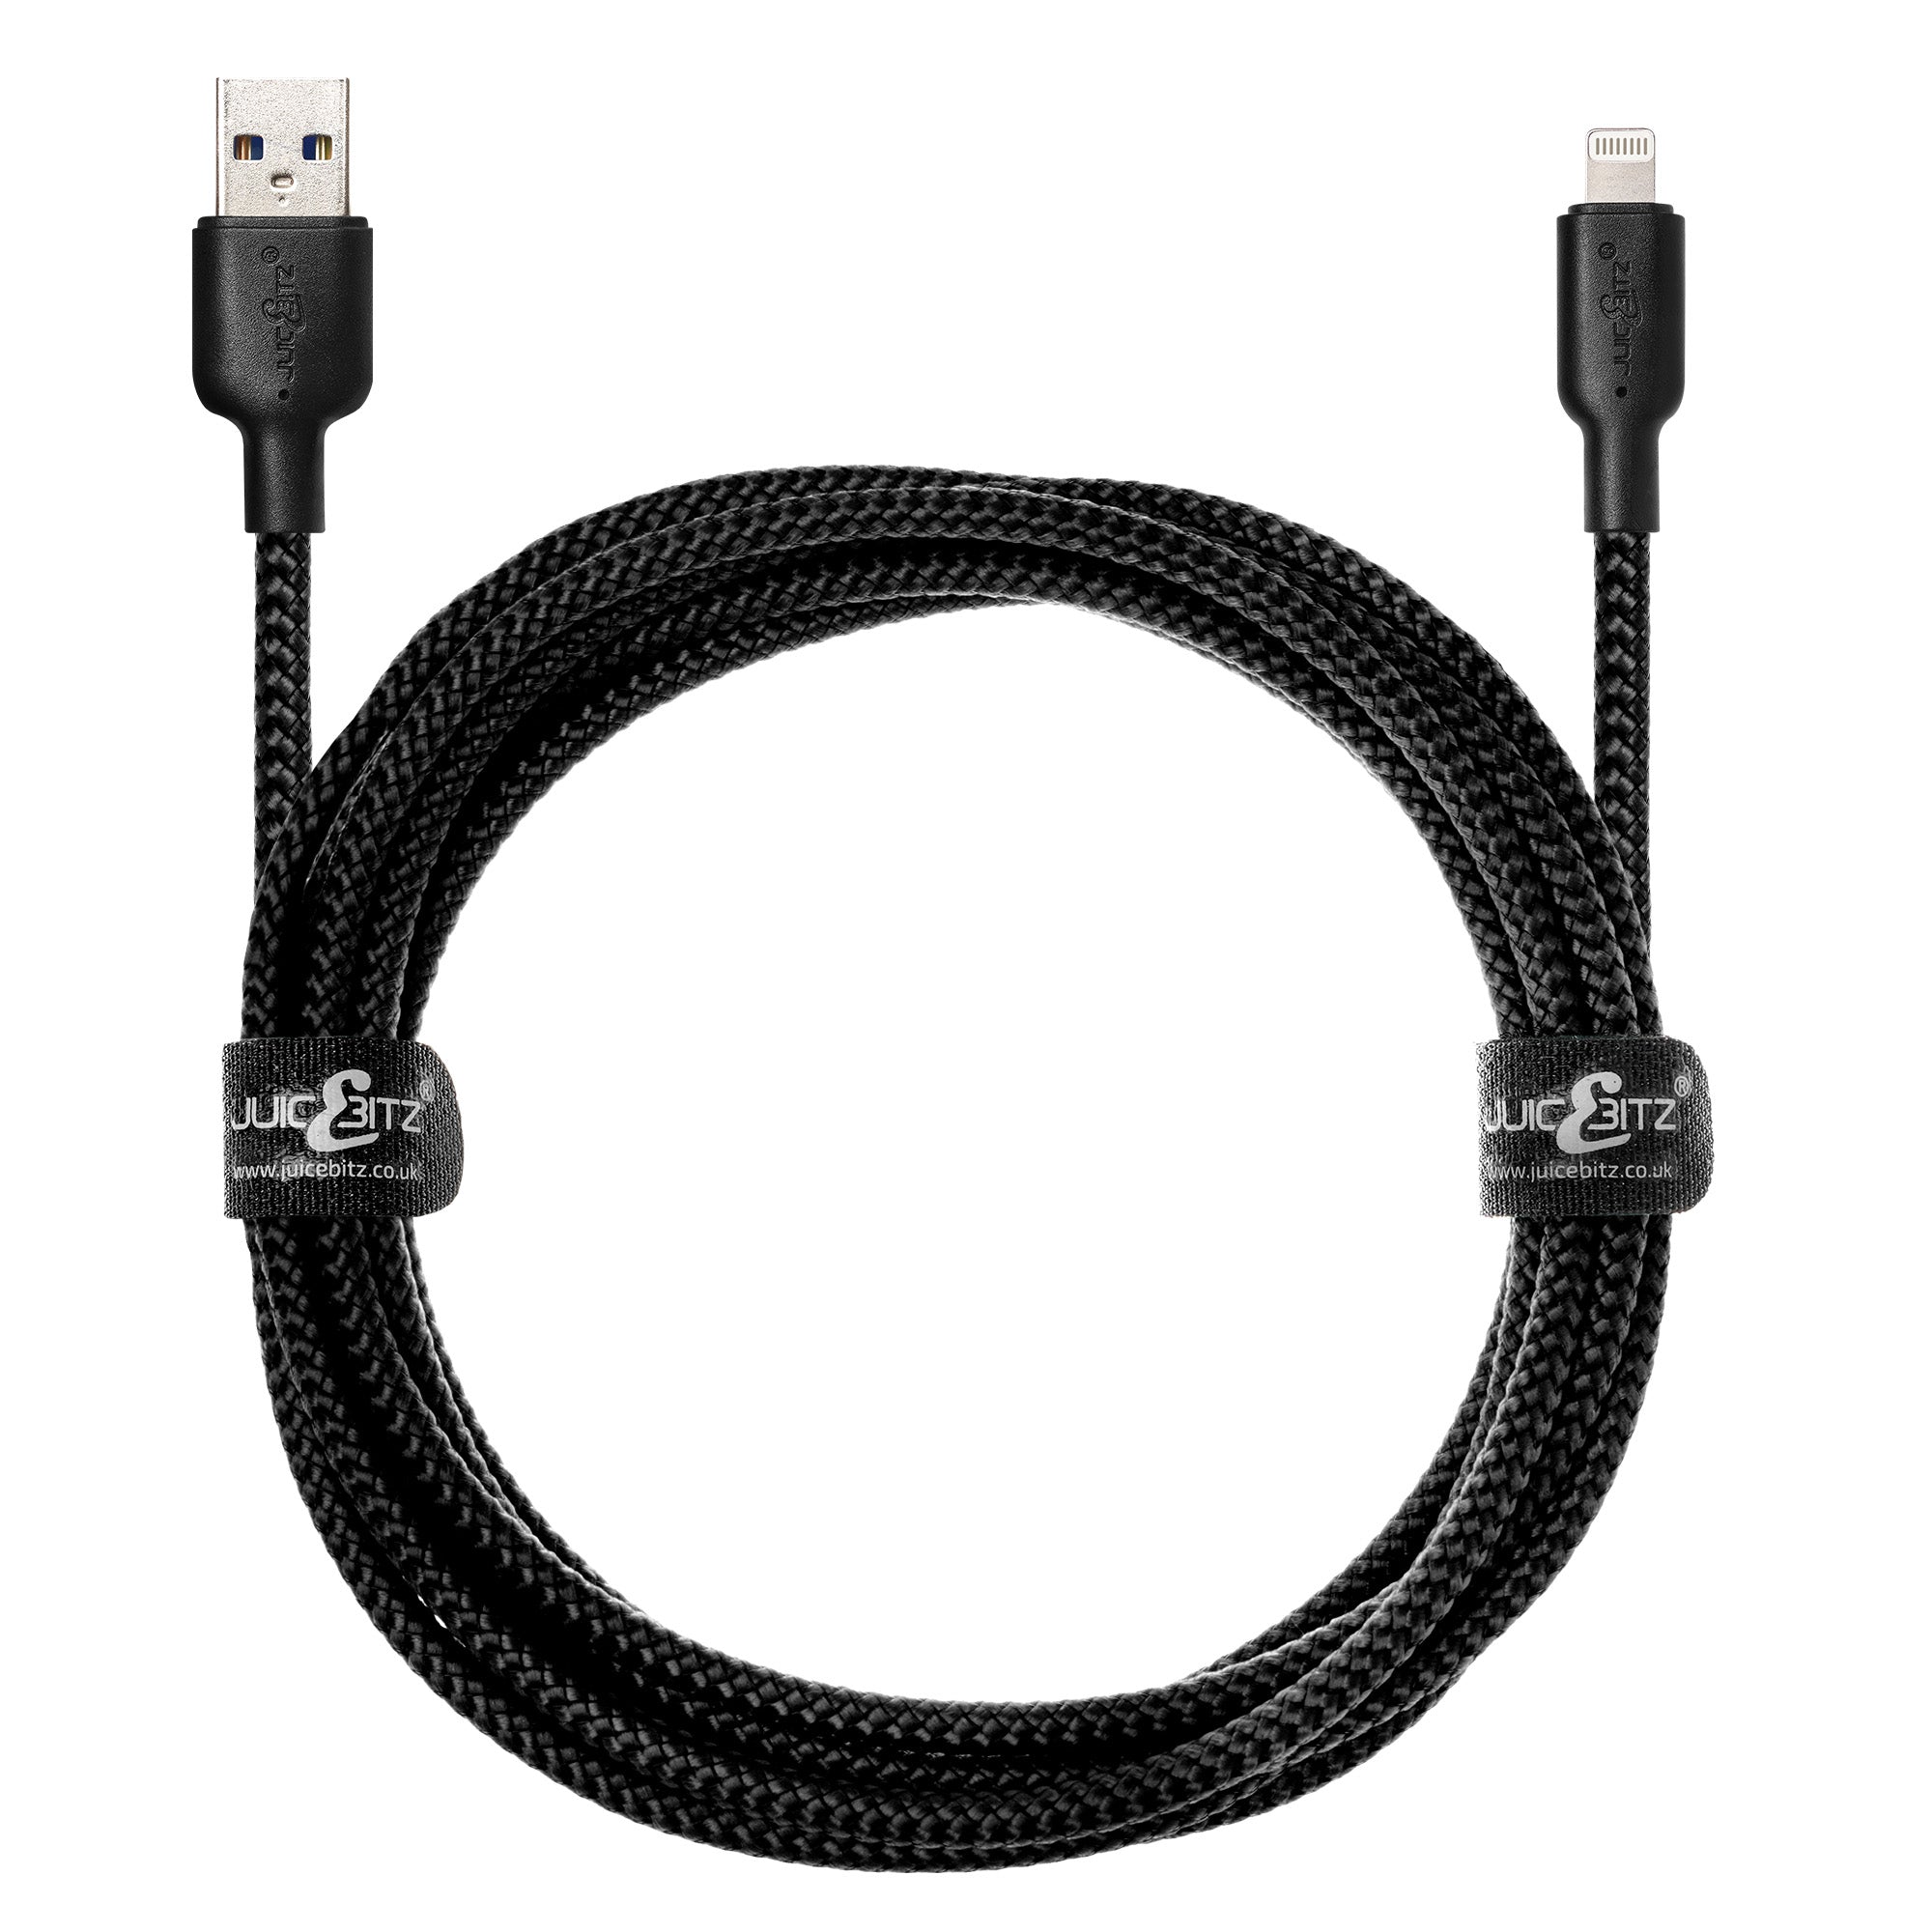 Braided Heavy Duty USB Charger Cable Data Sync Wire Lead for iPhone, iPad, iPod - Black